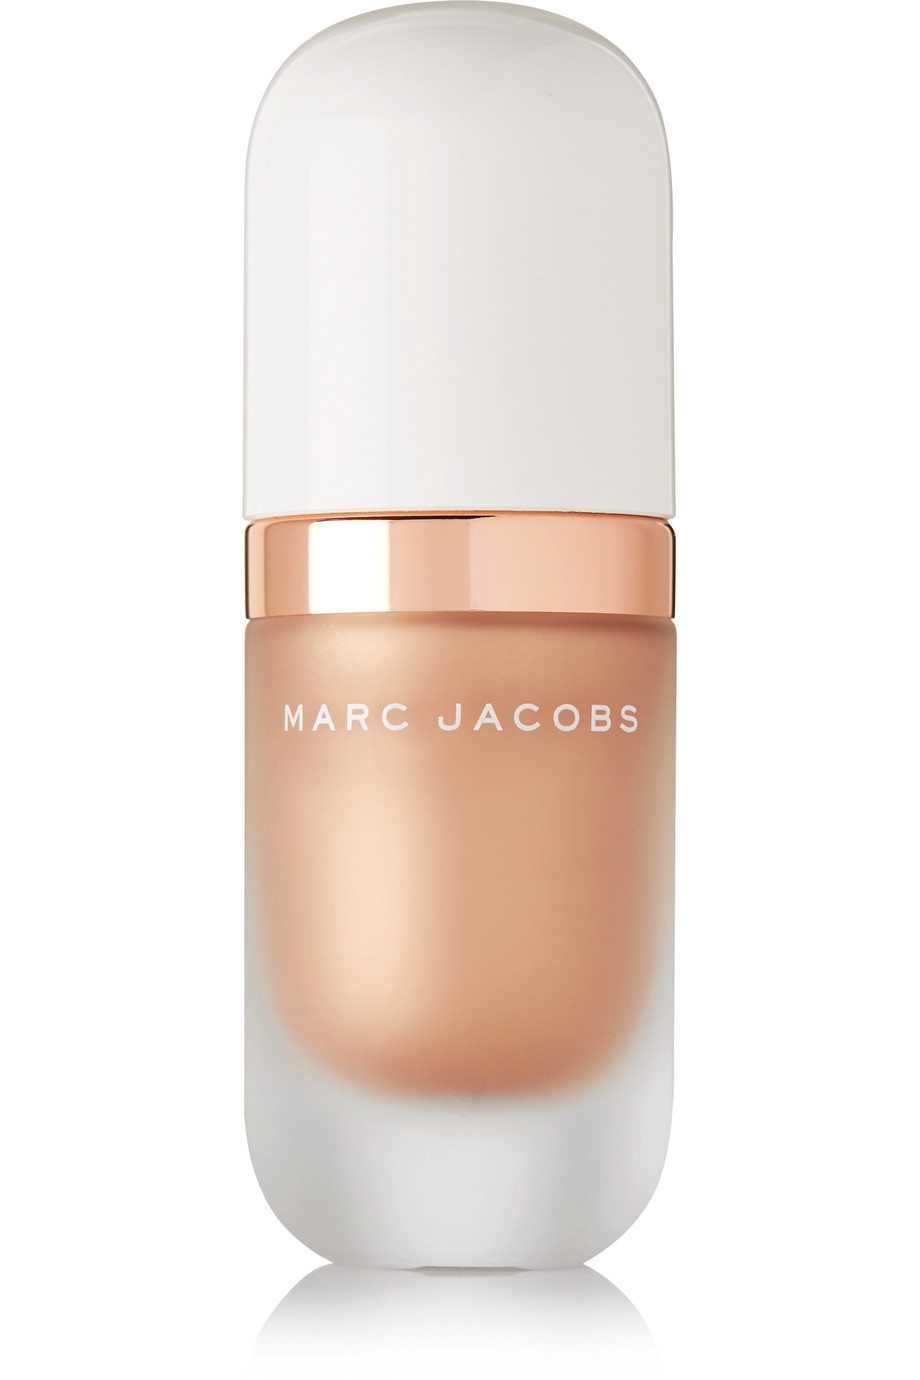 Marc Jacobs highlighter